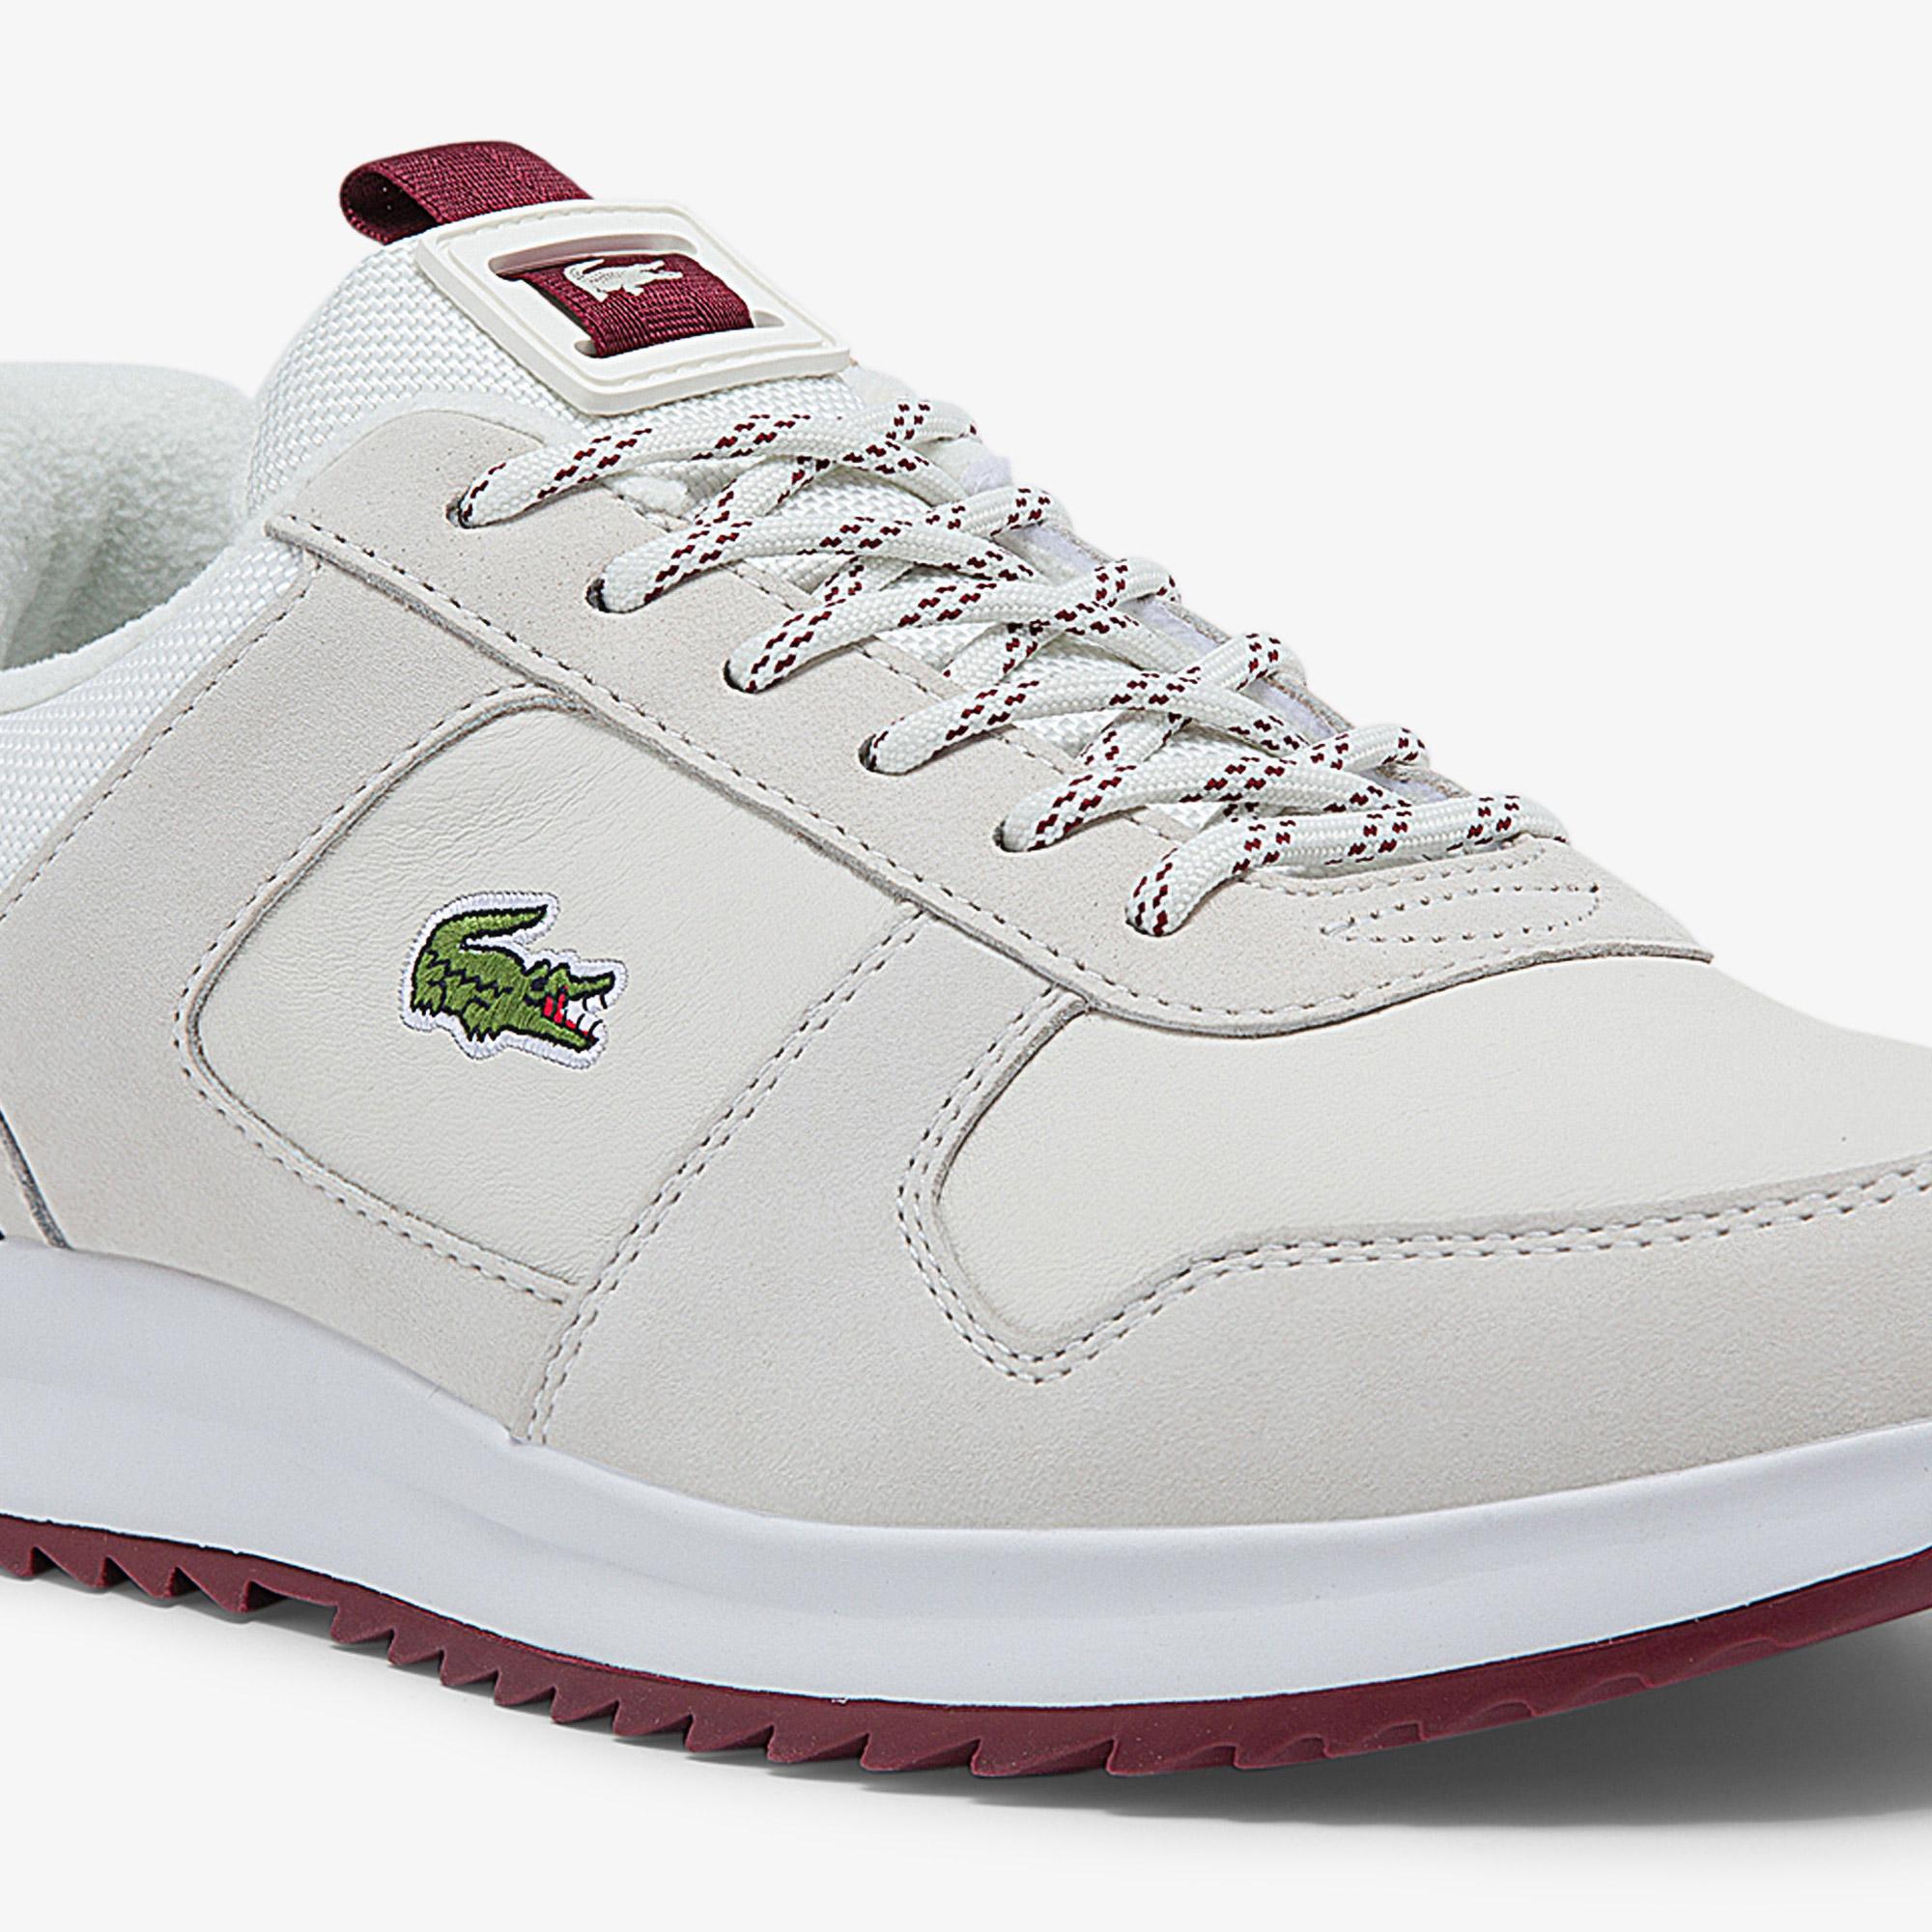 Lacoste Men's Joggeur 2.0 Leather and Textile Sneakers